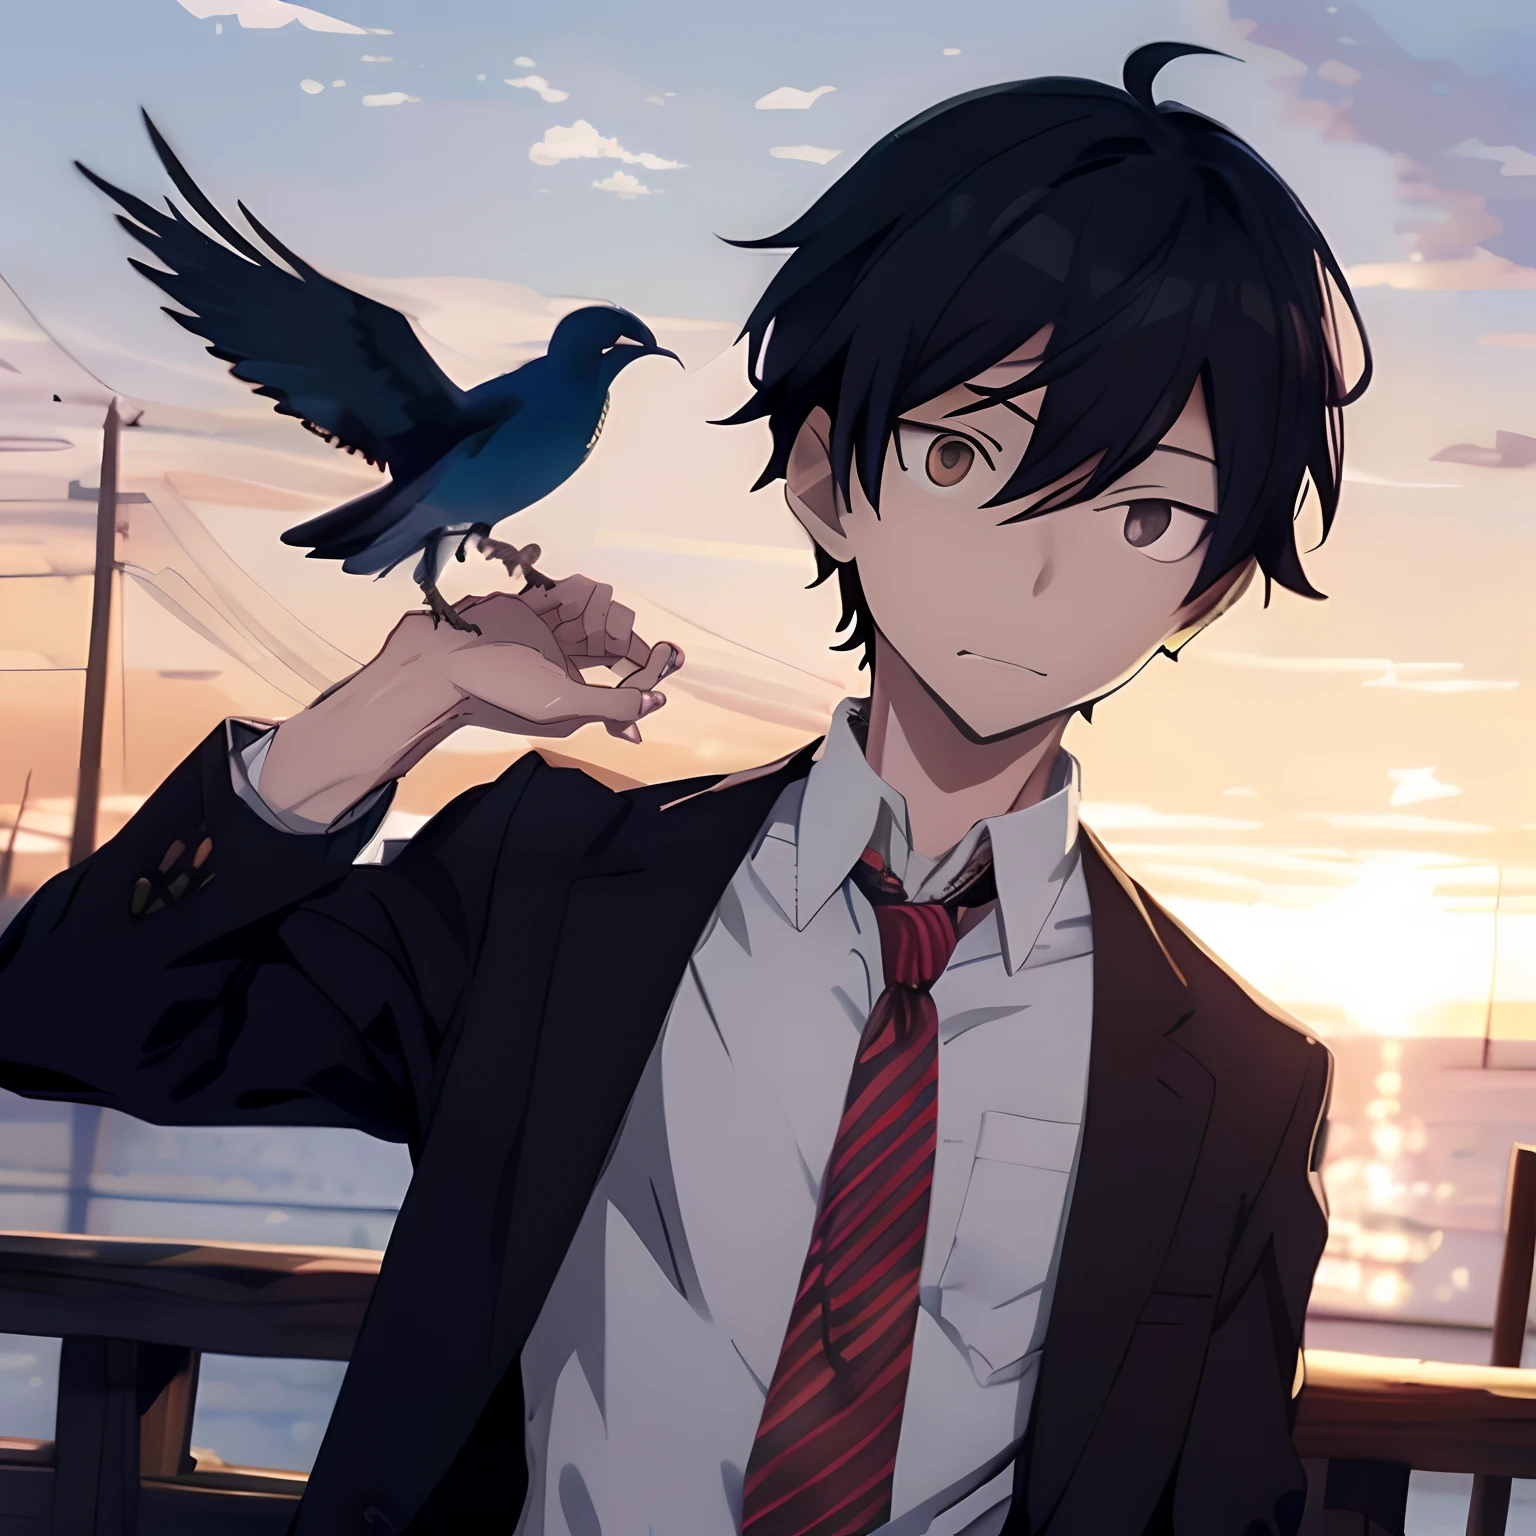 anime, a man in a suit and tie holding a bird, inspired by Okumura Masanobu, inspired by Okumura Togyu, young anime man, handsome anime pose, 4k anime wallpaper, with his pet bird, anime wallpaper 4 k, anime wallpaper 4k, 4 k manga wallpaper, tall anime guy with blue eyes